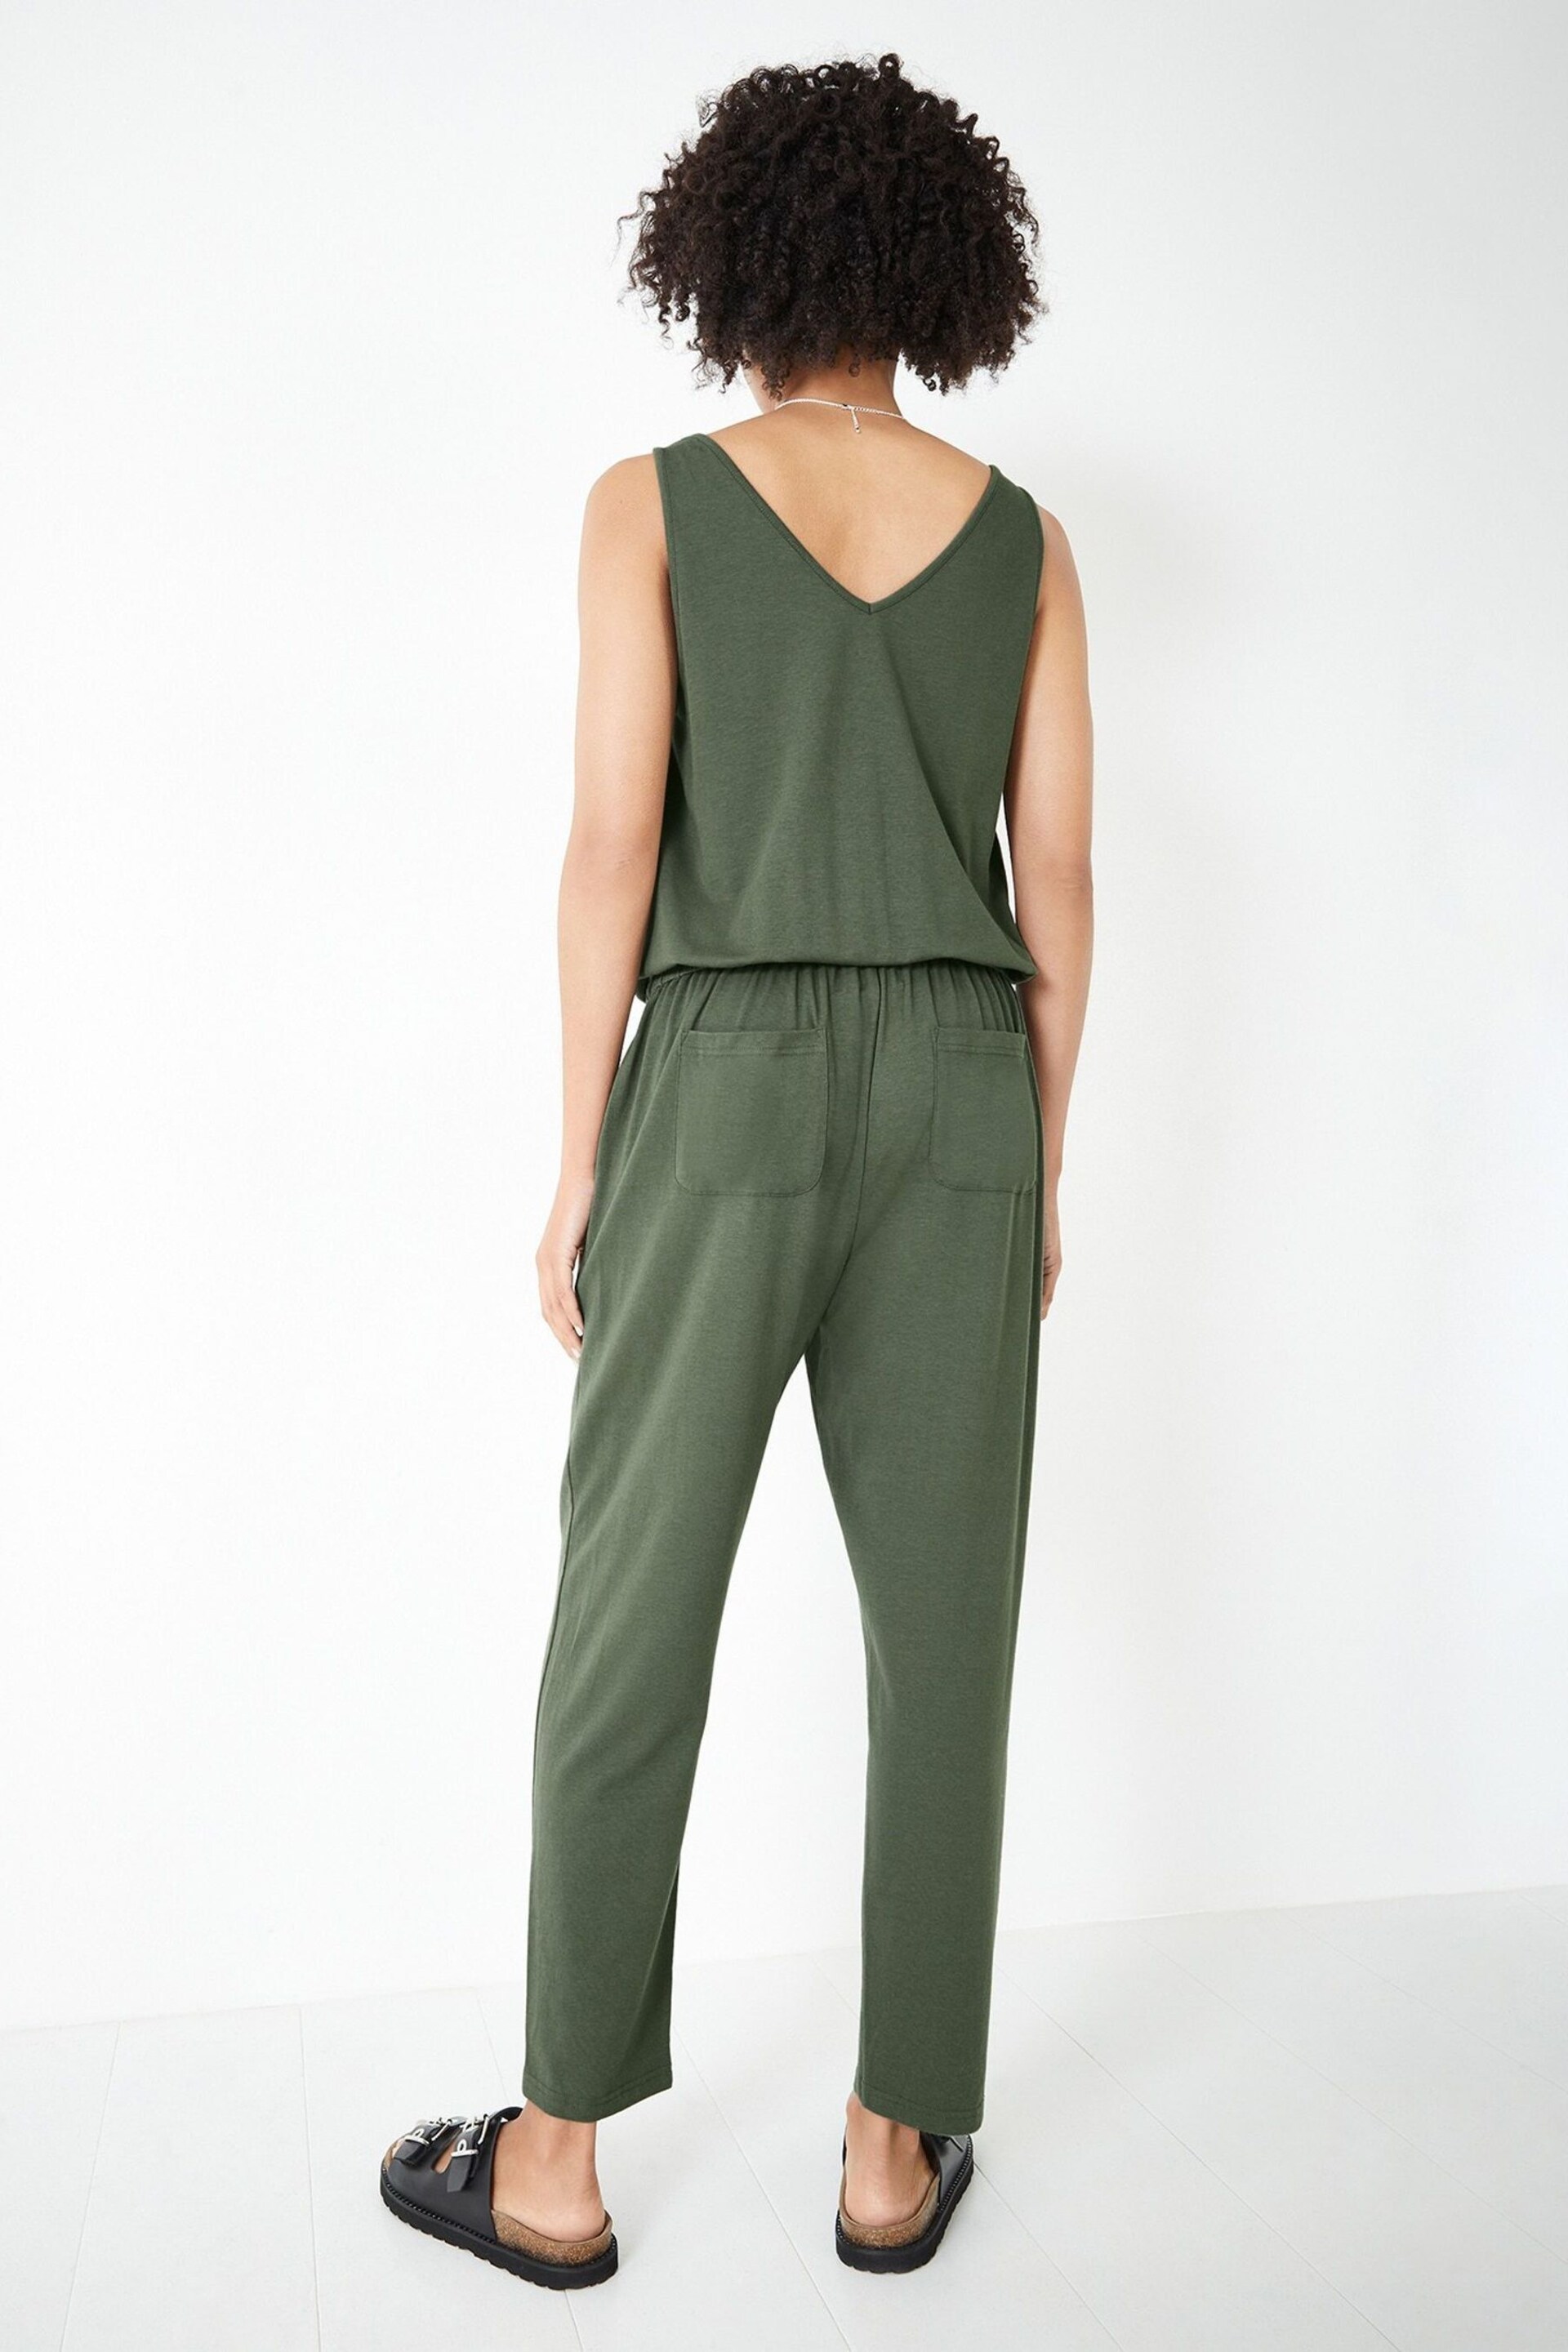 Hush Green Cropped Jersey Jumpsuit - Image 4 of 5